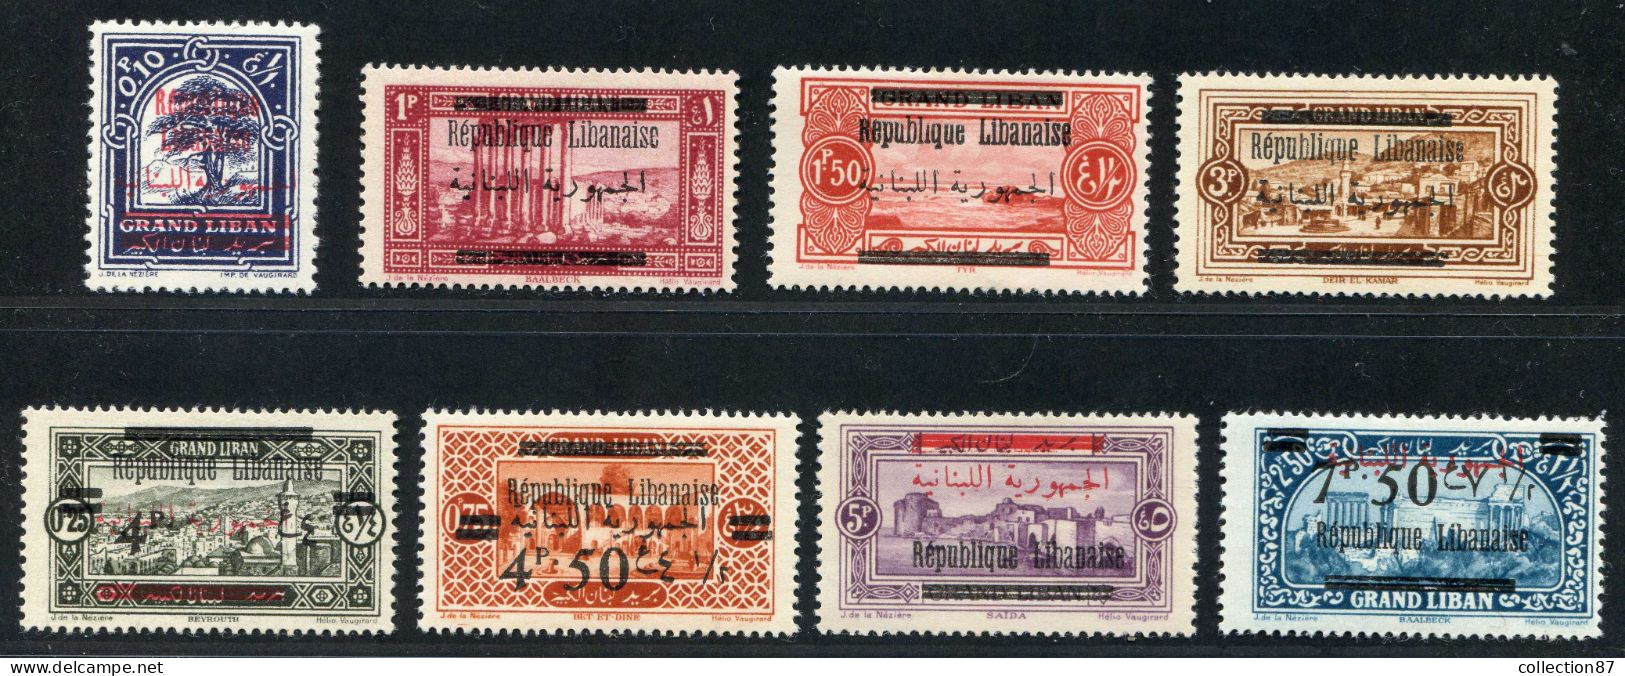 REF 089 > GRAND LIBAN < Entre N° 98 Et 107 * Sauf N° 100 ** < Neuf Ch Dos Visible - MH * - Unused Stamps